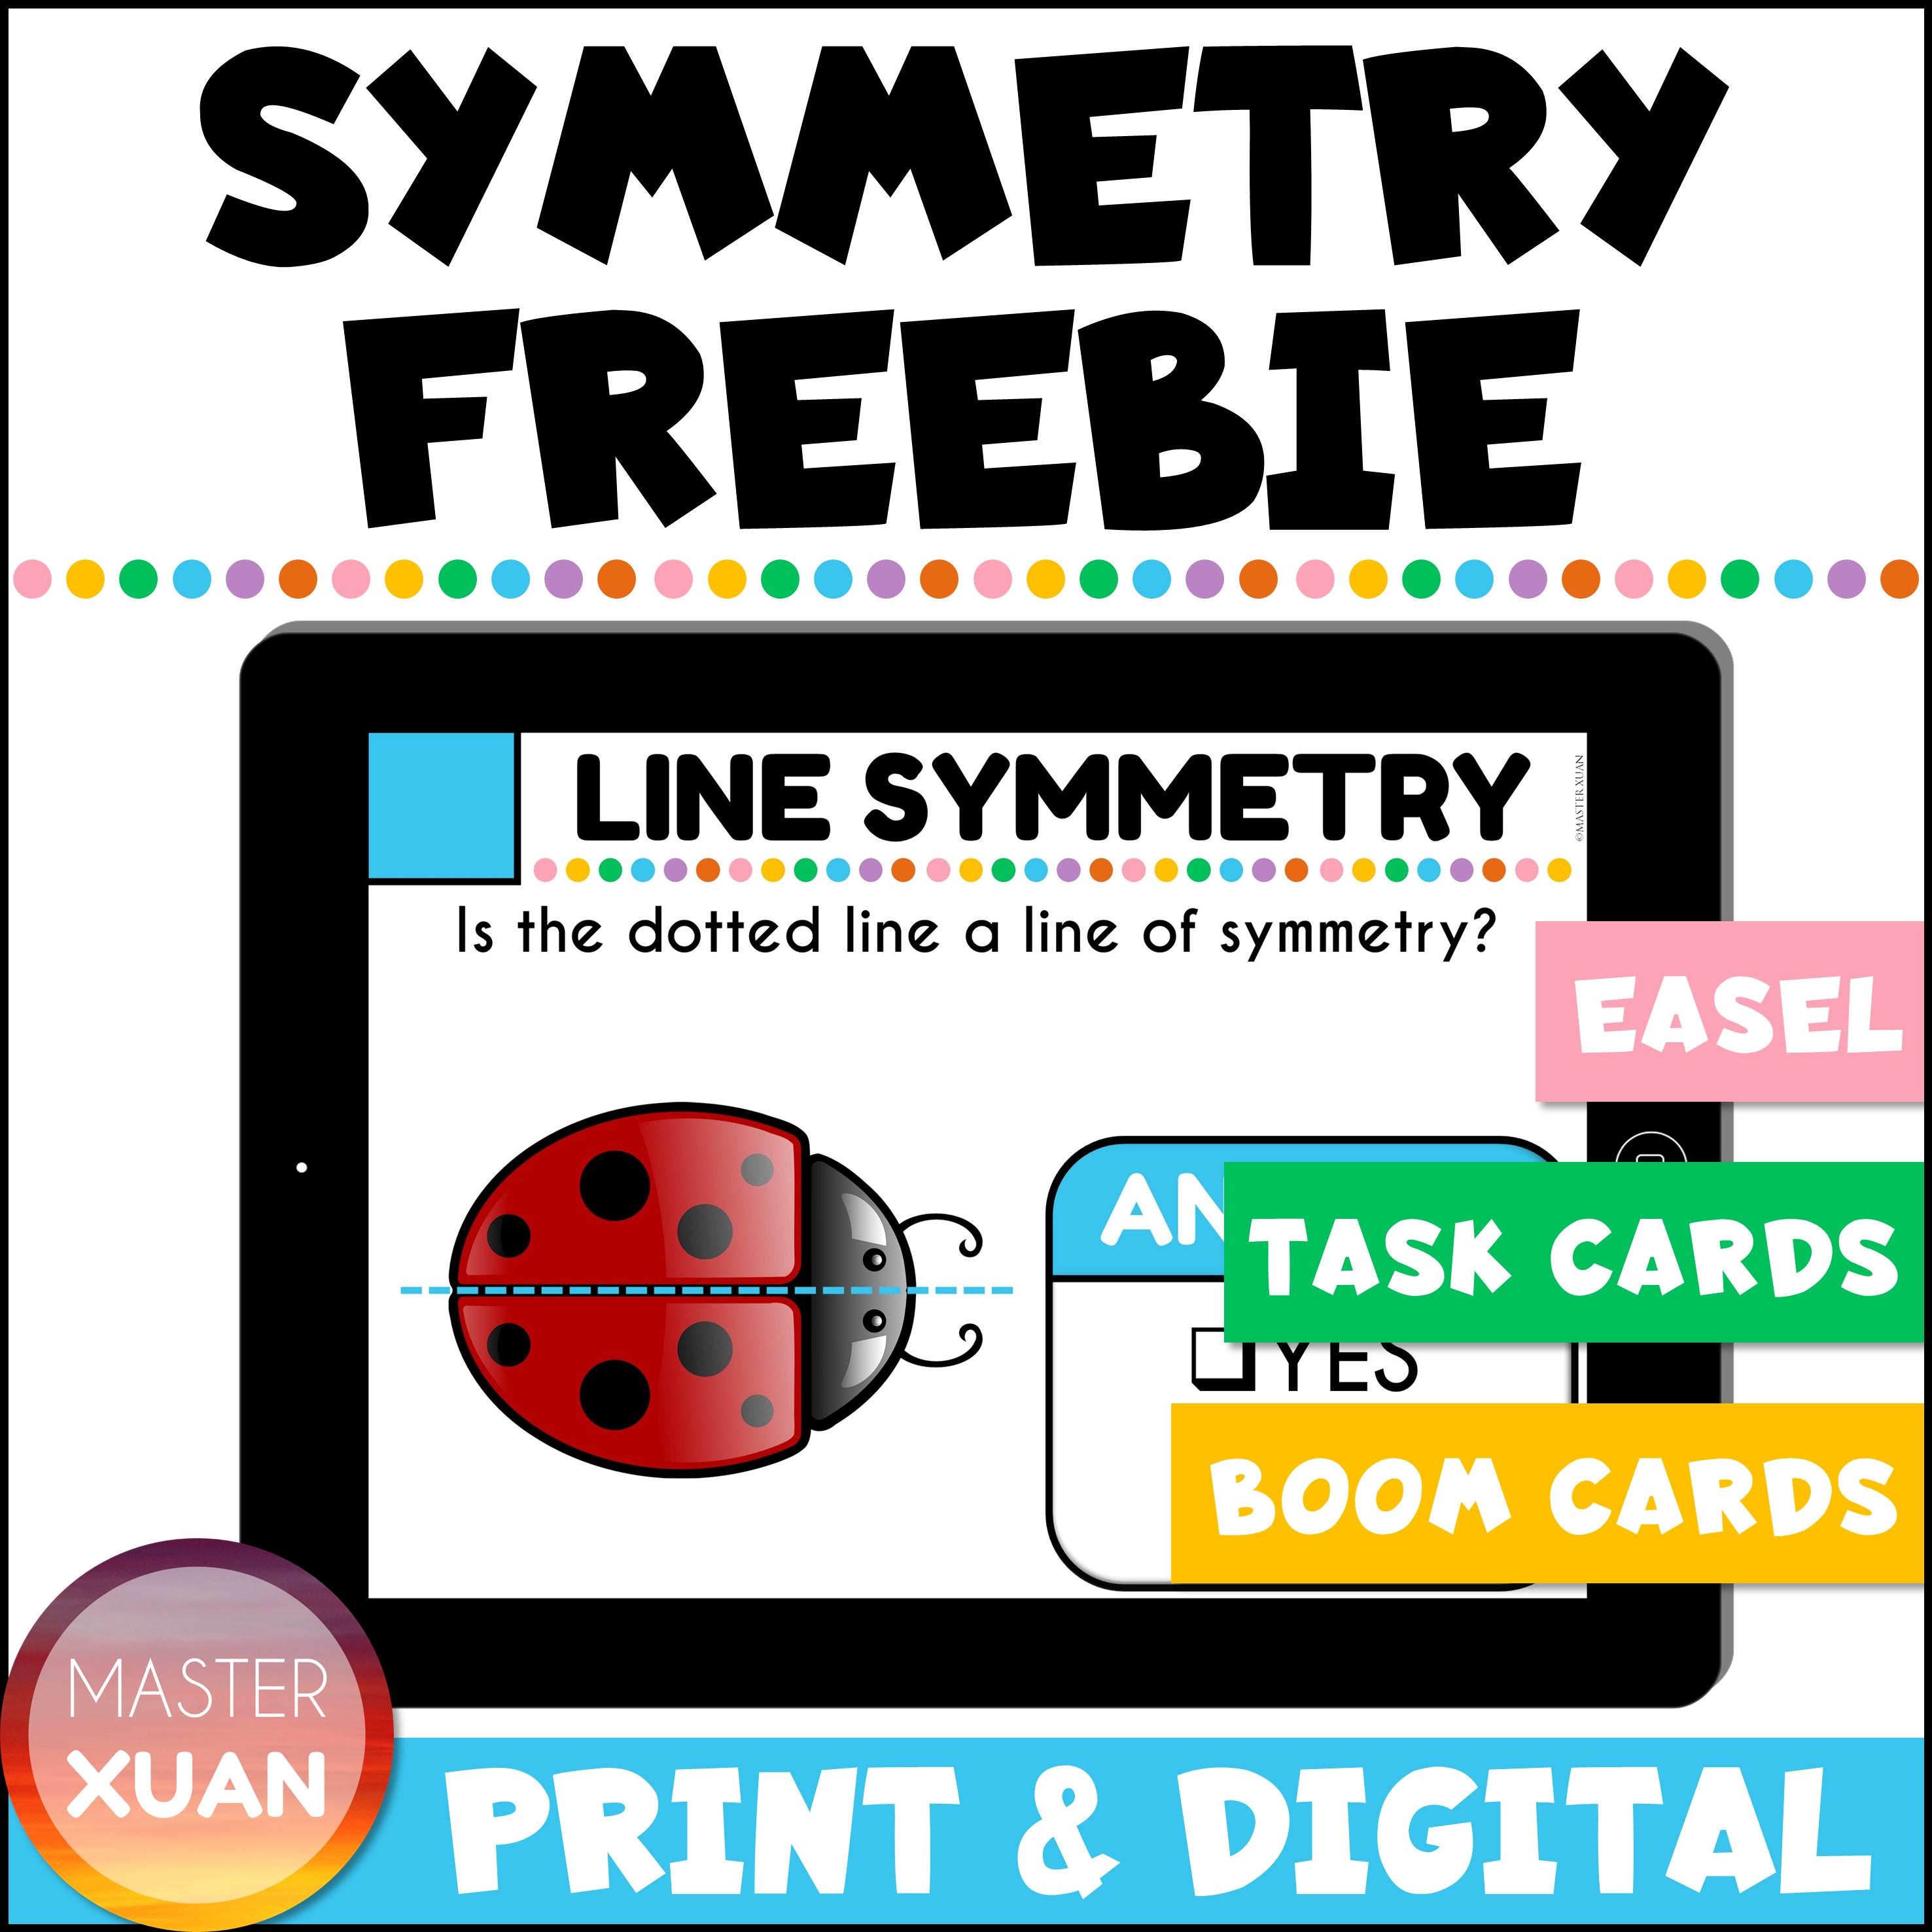 5 Interesting And Fun Math Activities With Symmetry ~ Master Xuan